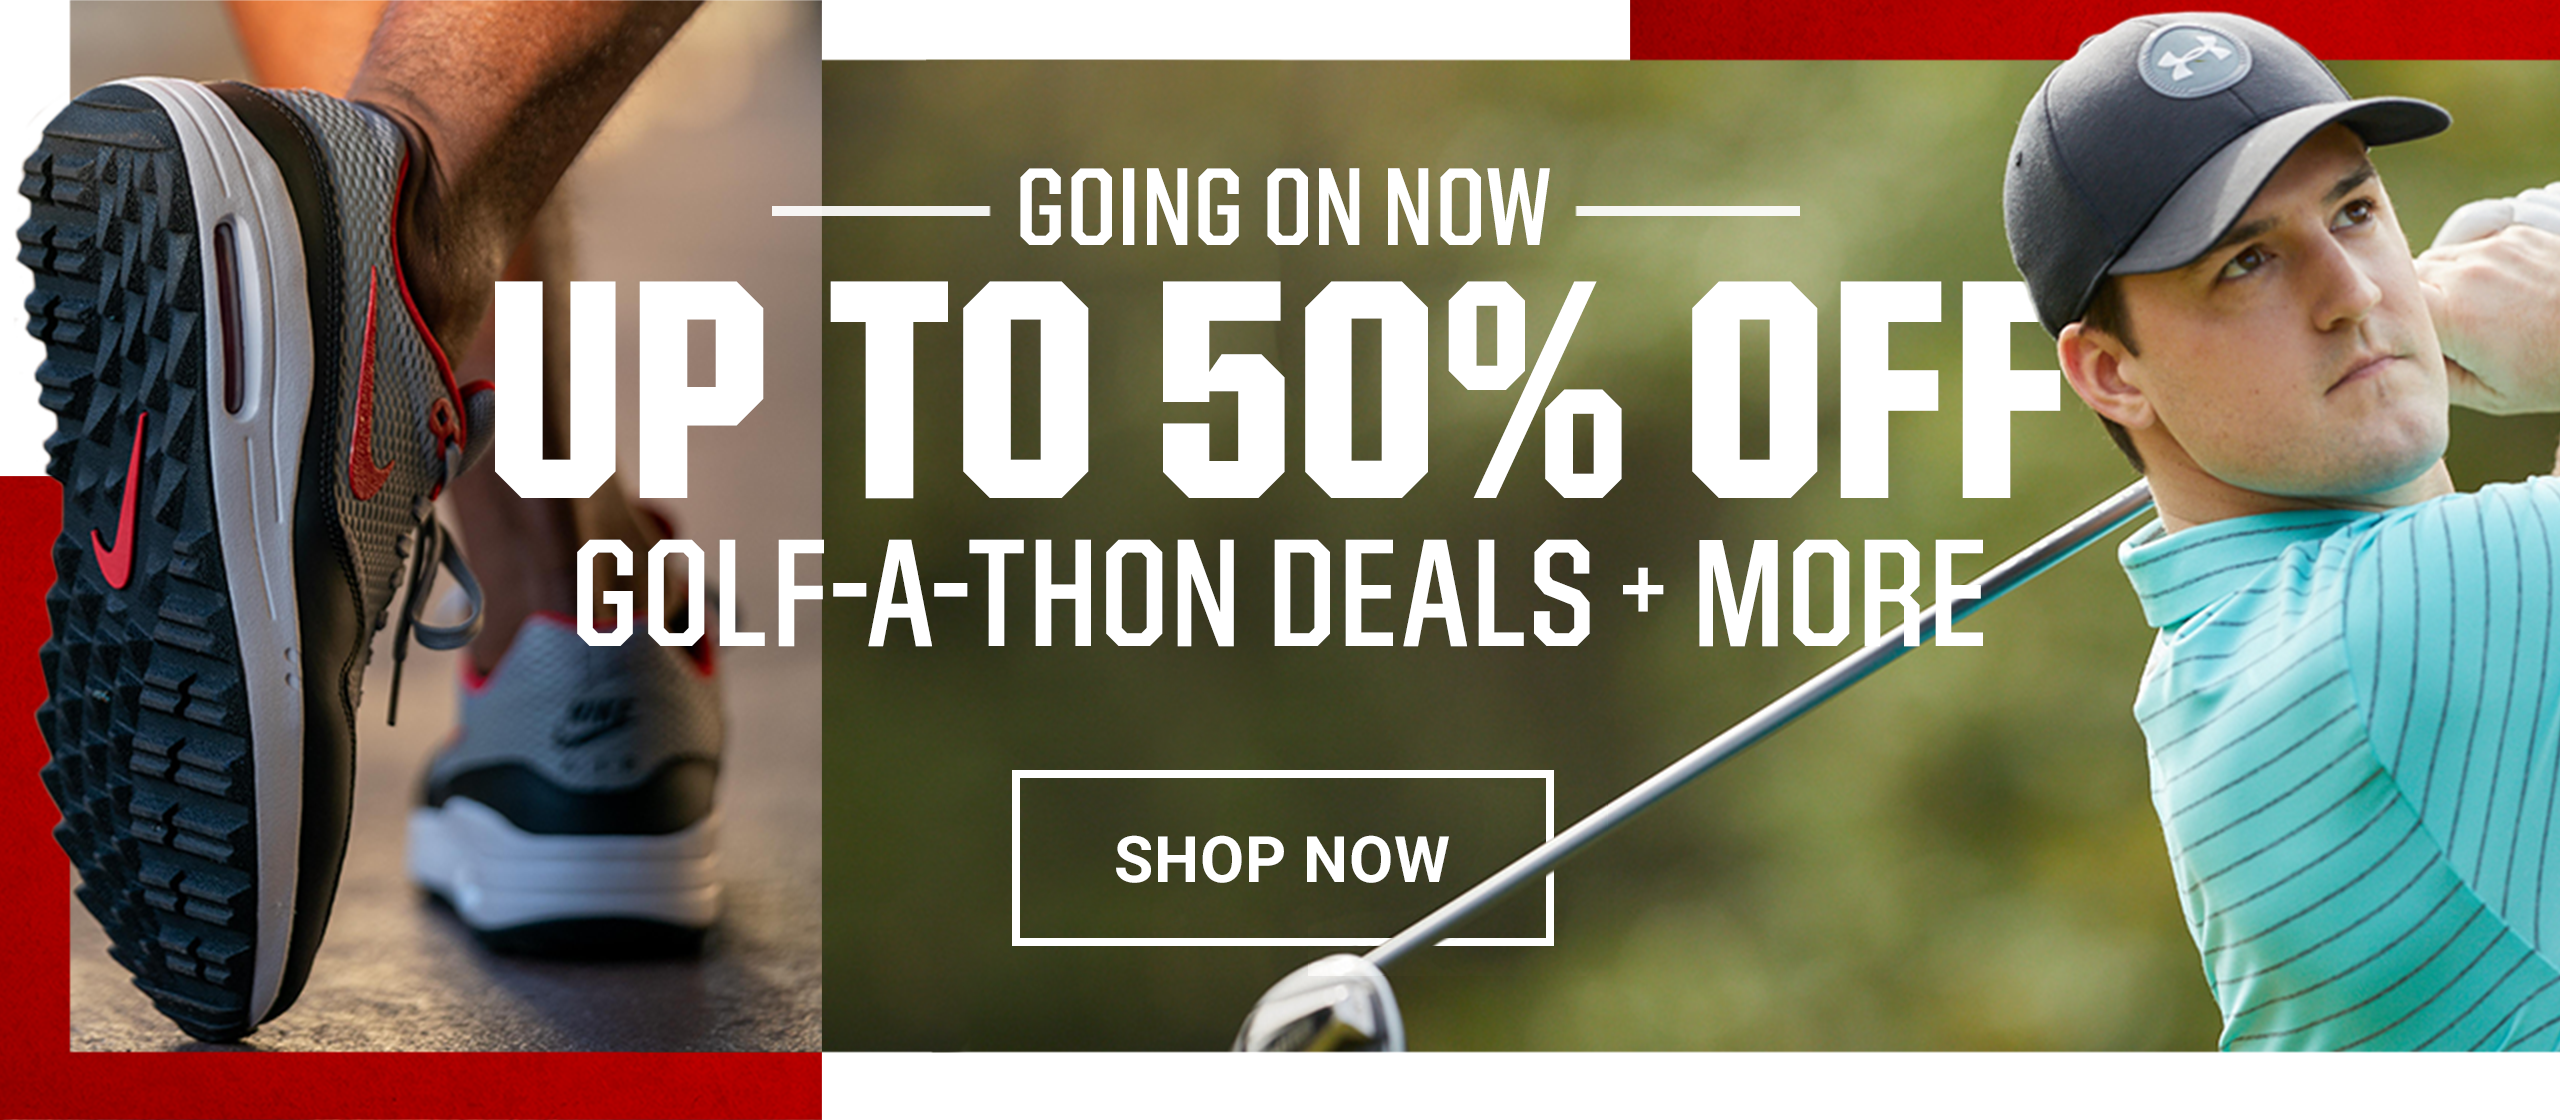 Going on Now, Up to 50% Off Golf-A-Thon Deals + More, Shop Now.